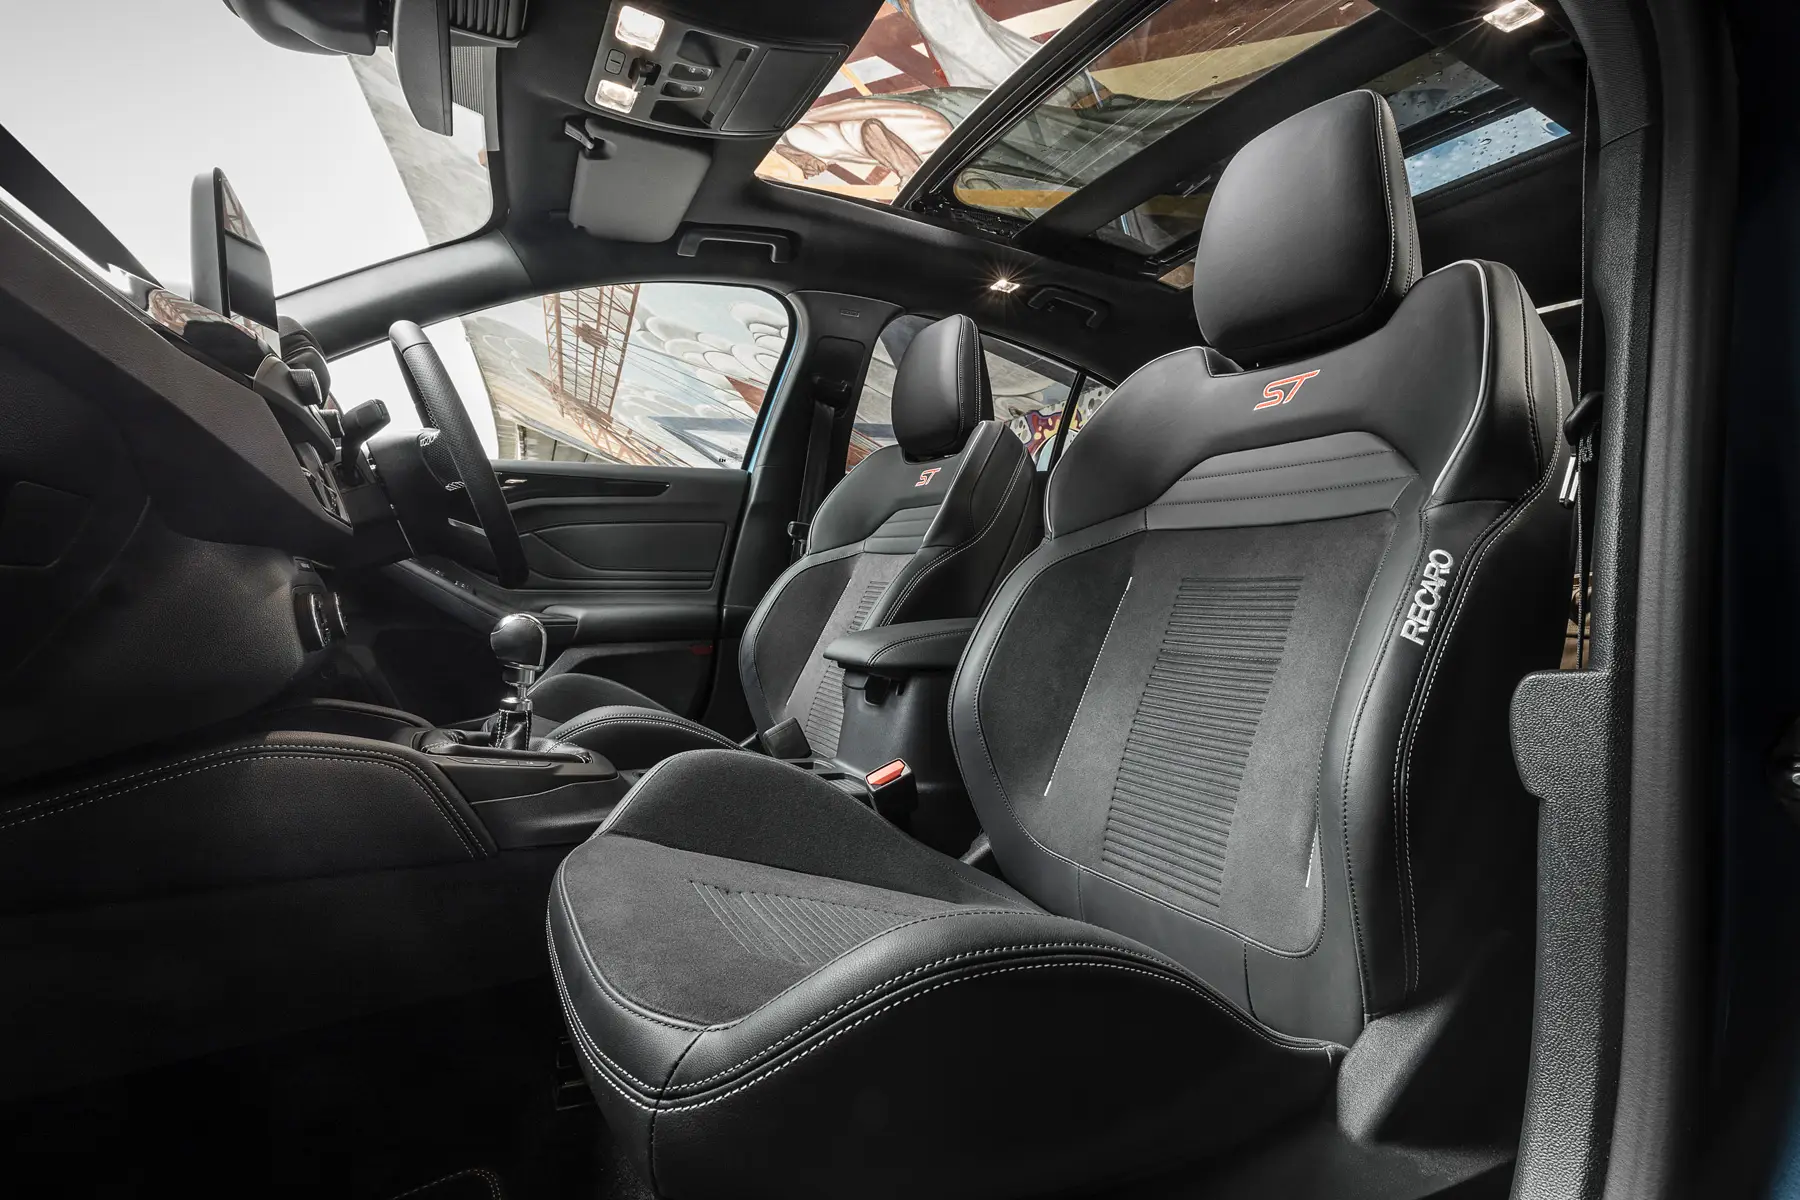 Ford Focus ST Review: interior seating